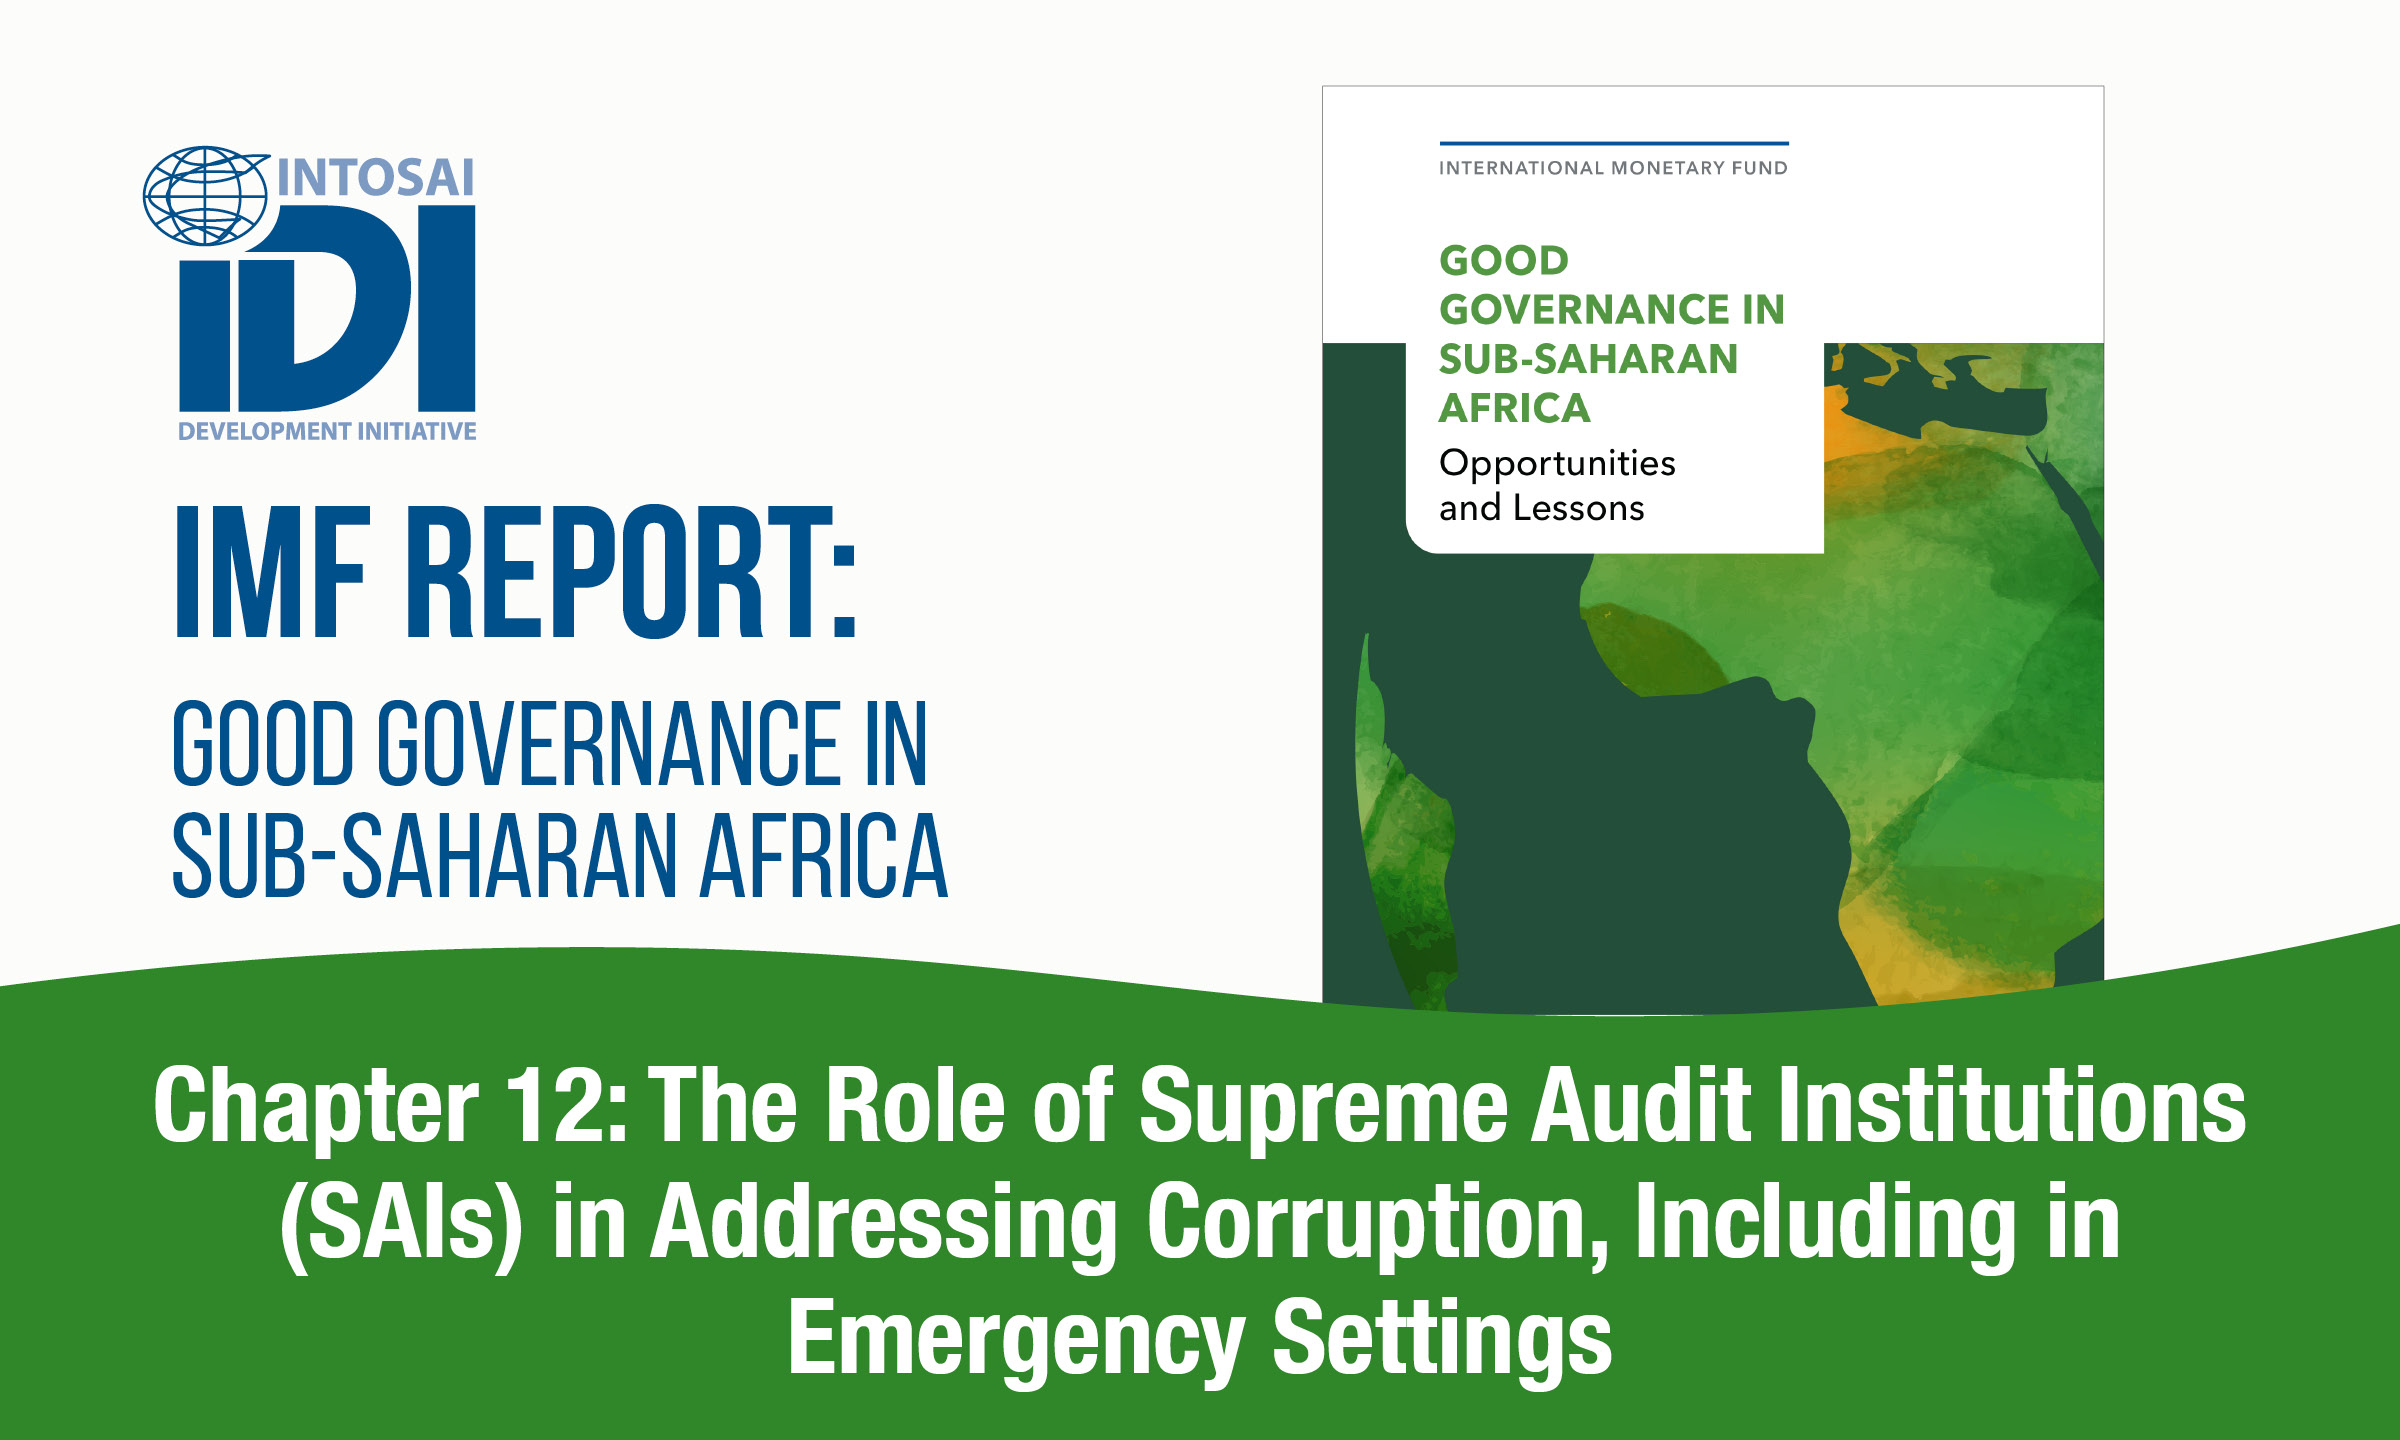 IDI addresses SAIs' role in tackling corruption in IMF's report: Good Governance in Sub-Saharan Africa